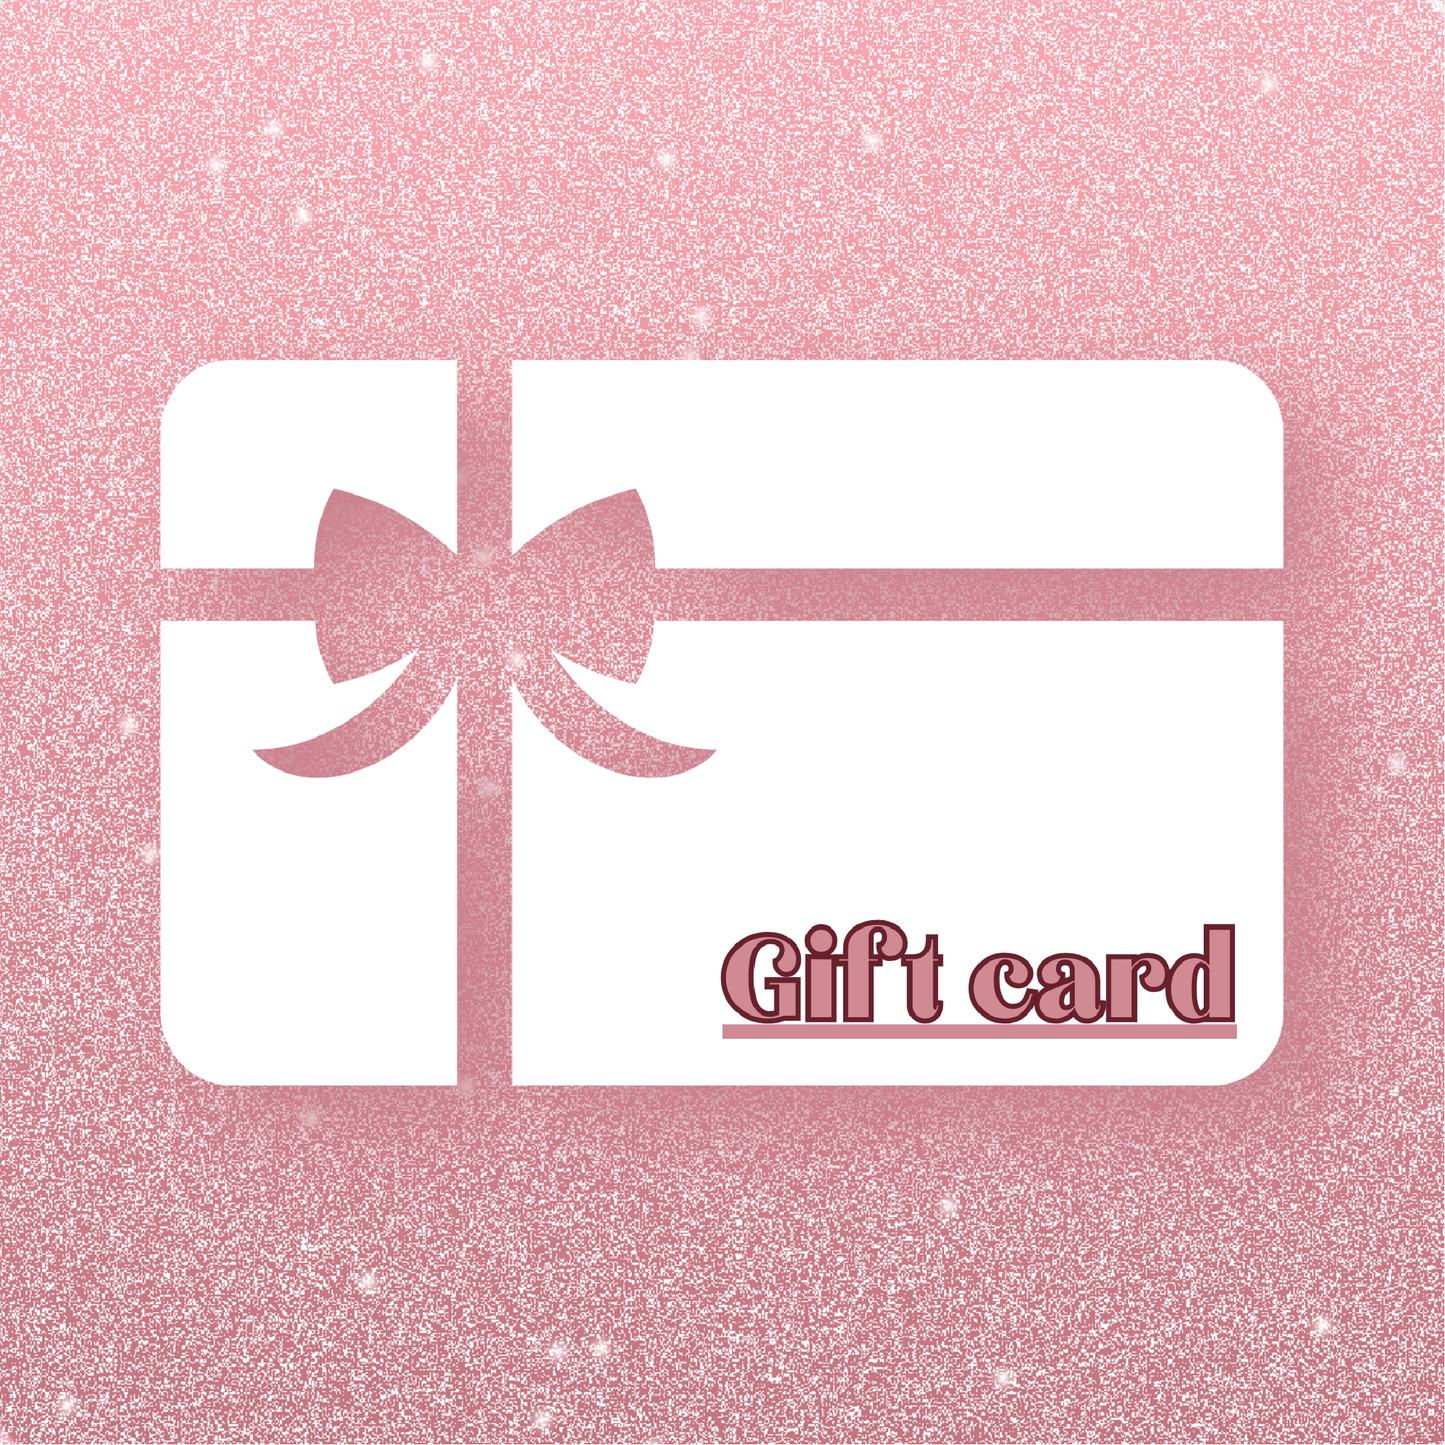 Give a Gift, gift cards, online gifts